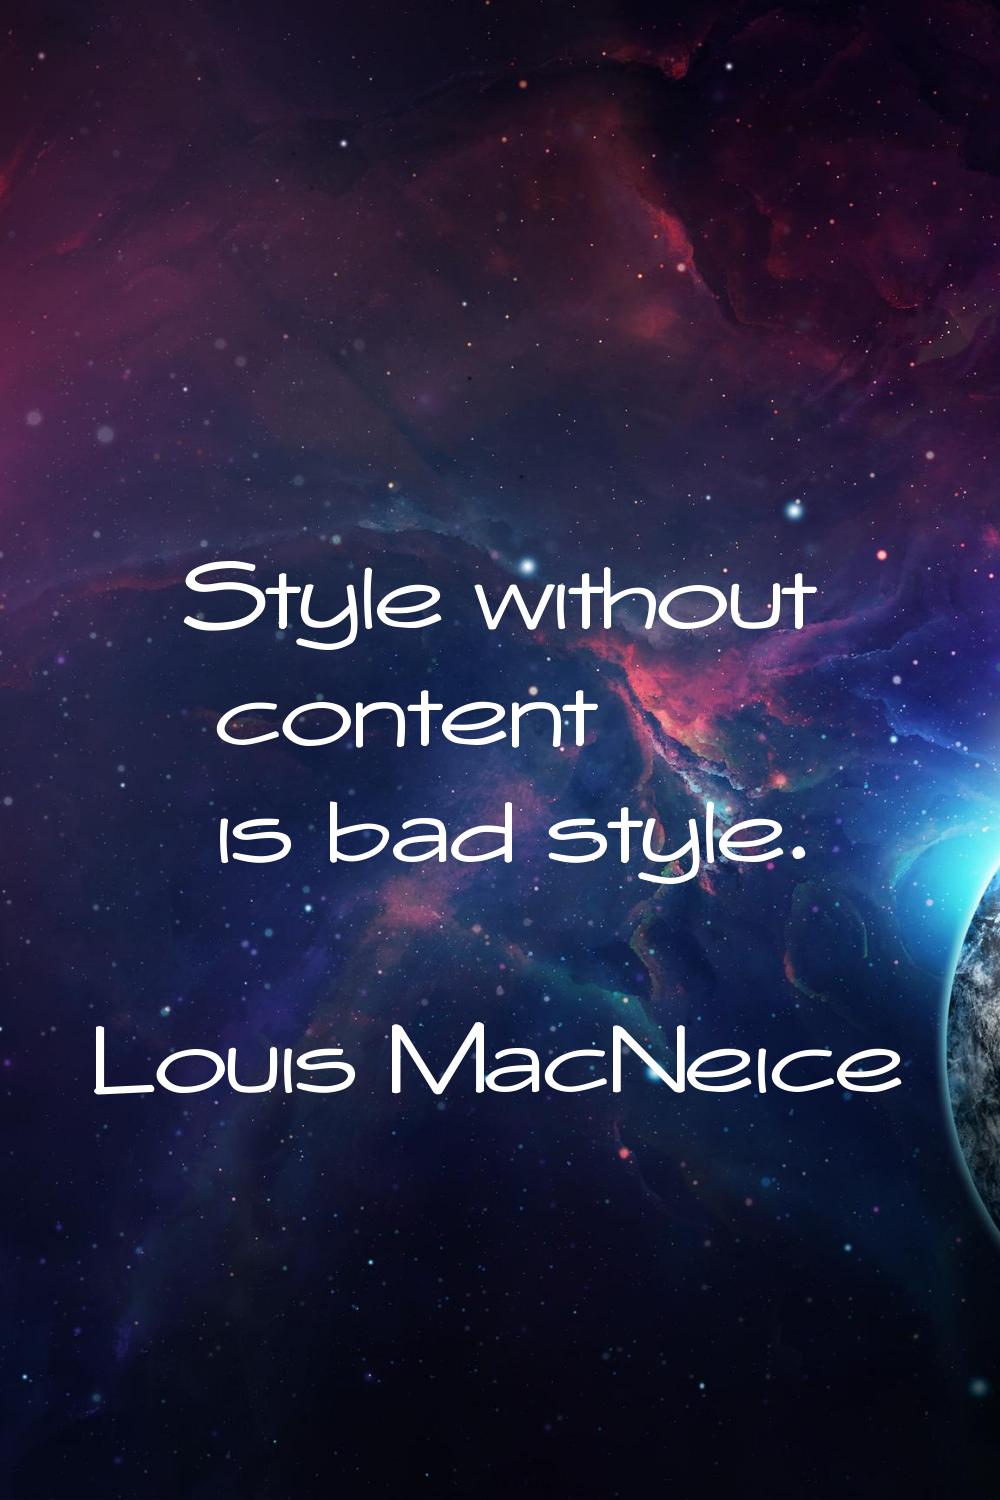 Style without content is bad style.